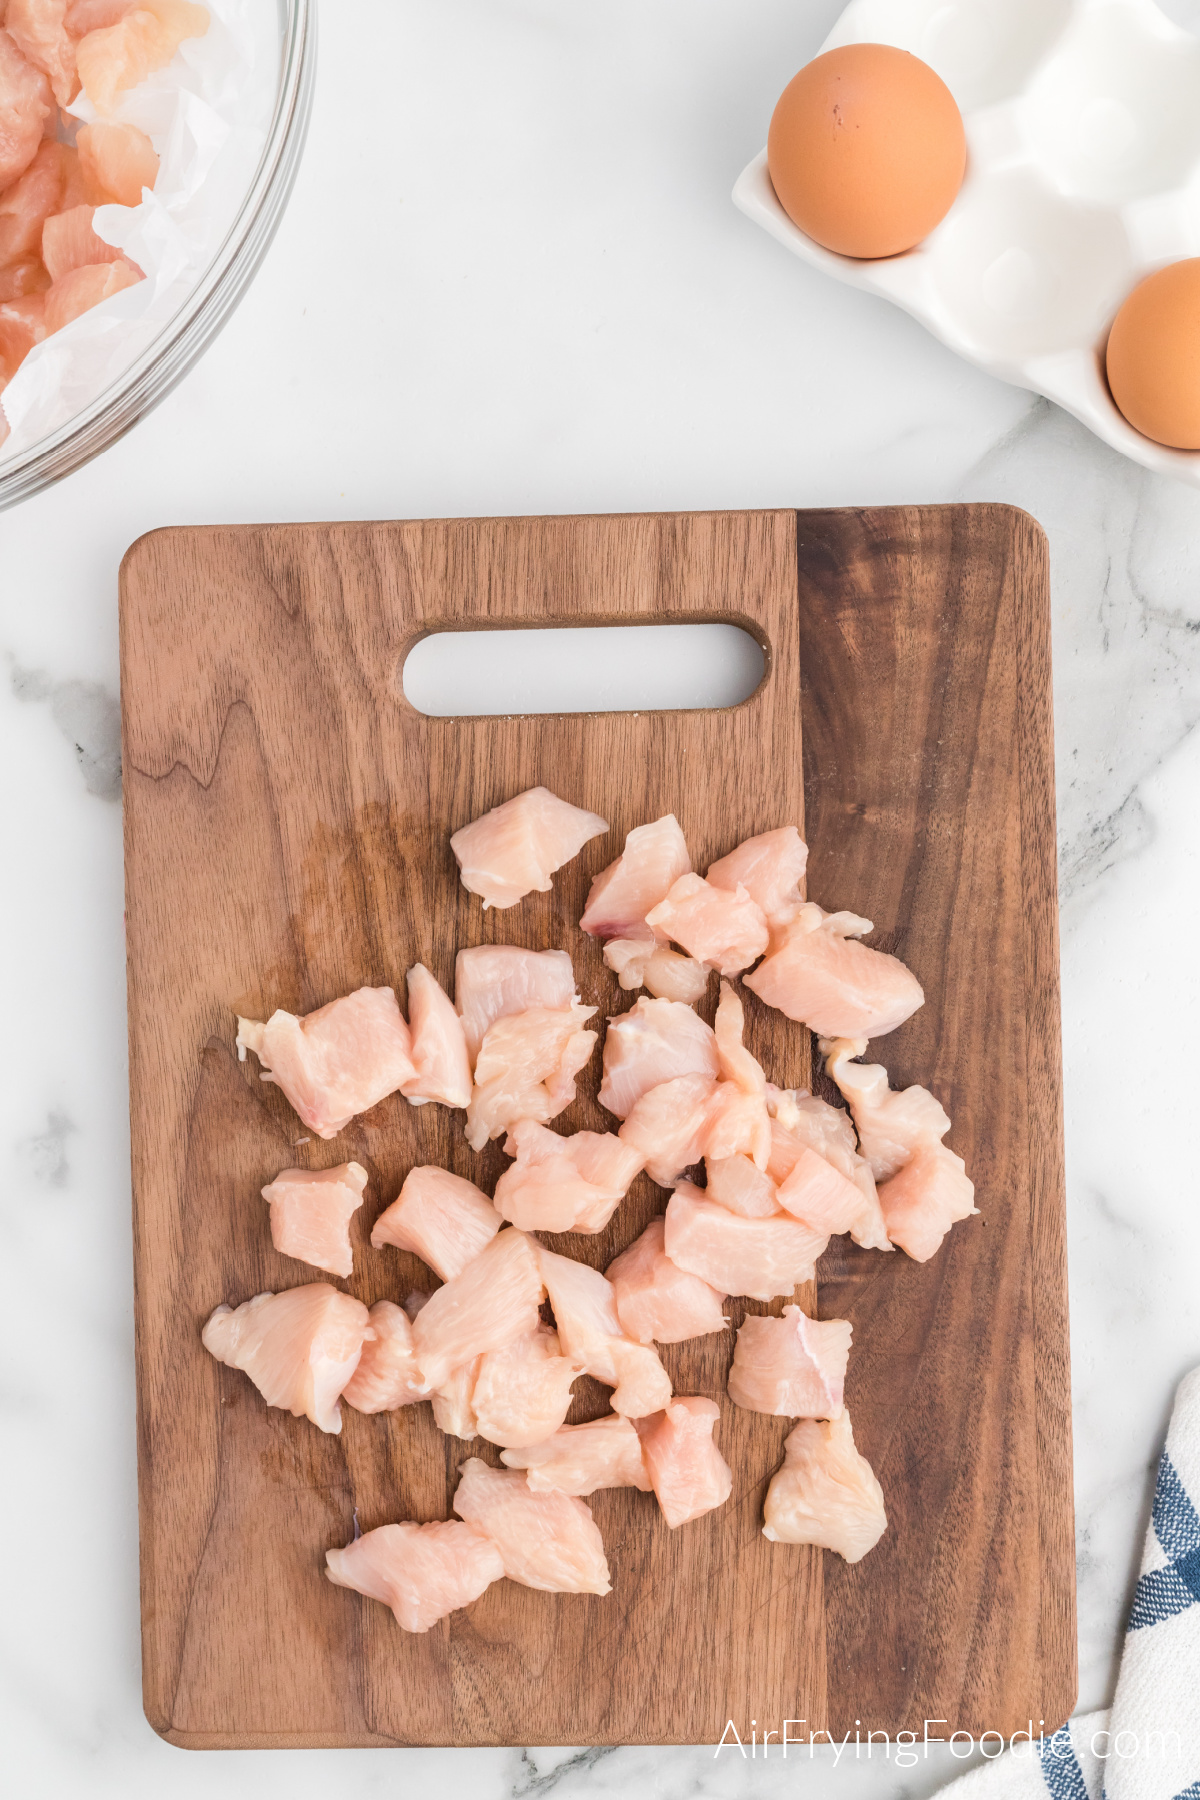 chicken breasts cut into bite sized pieces on a cutting board.